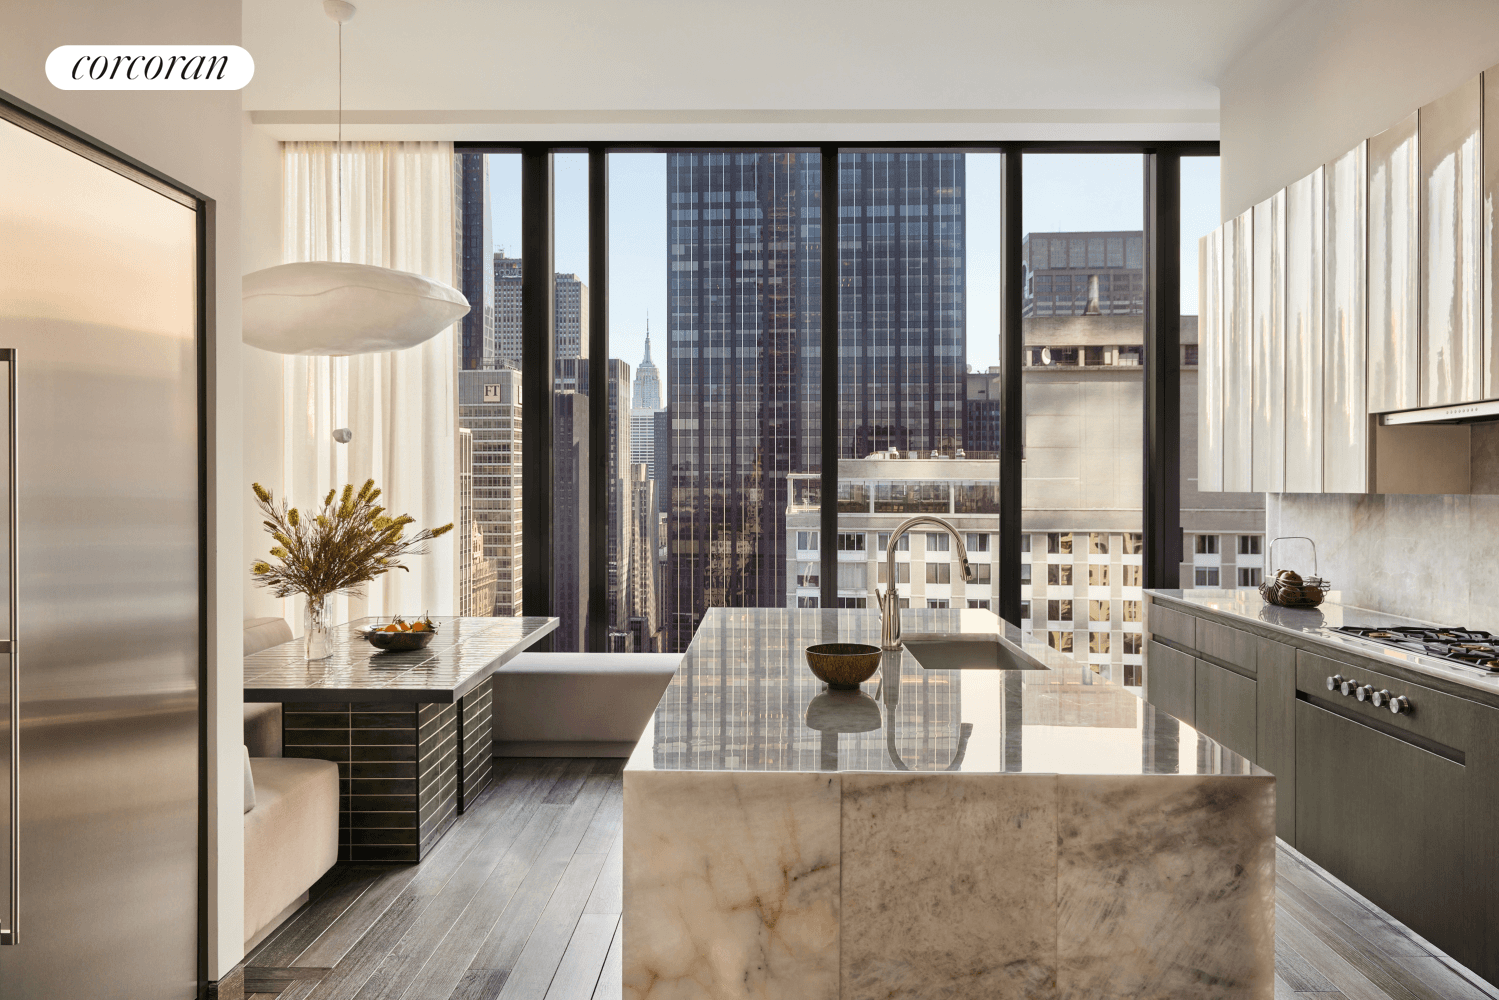 IMMEDIATE OCCUPANCYEnjoy beautiful views, light and high design in this prime full floor residence at 111 West 57th Street.